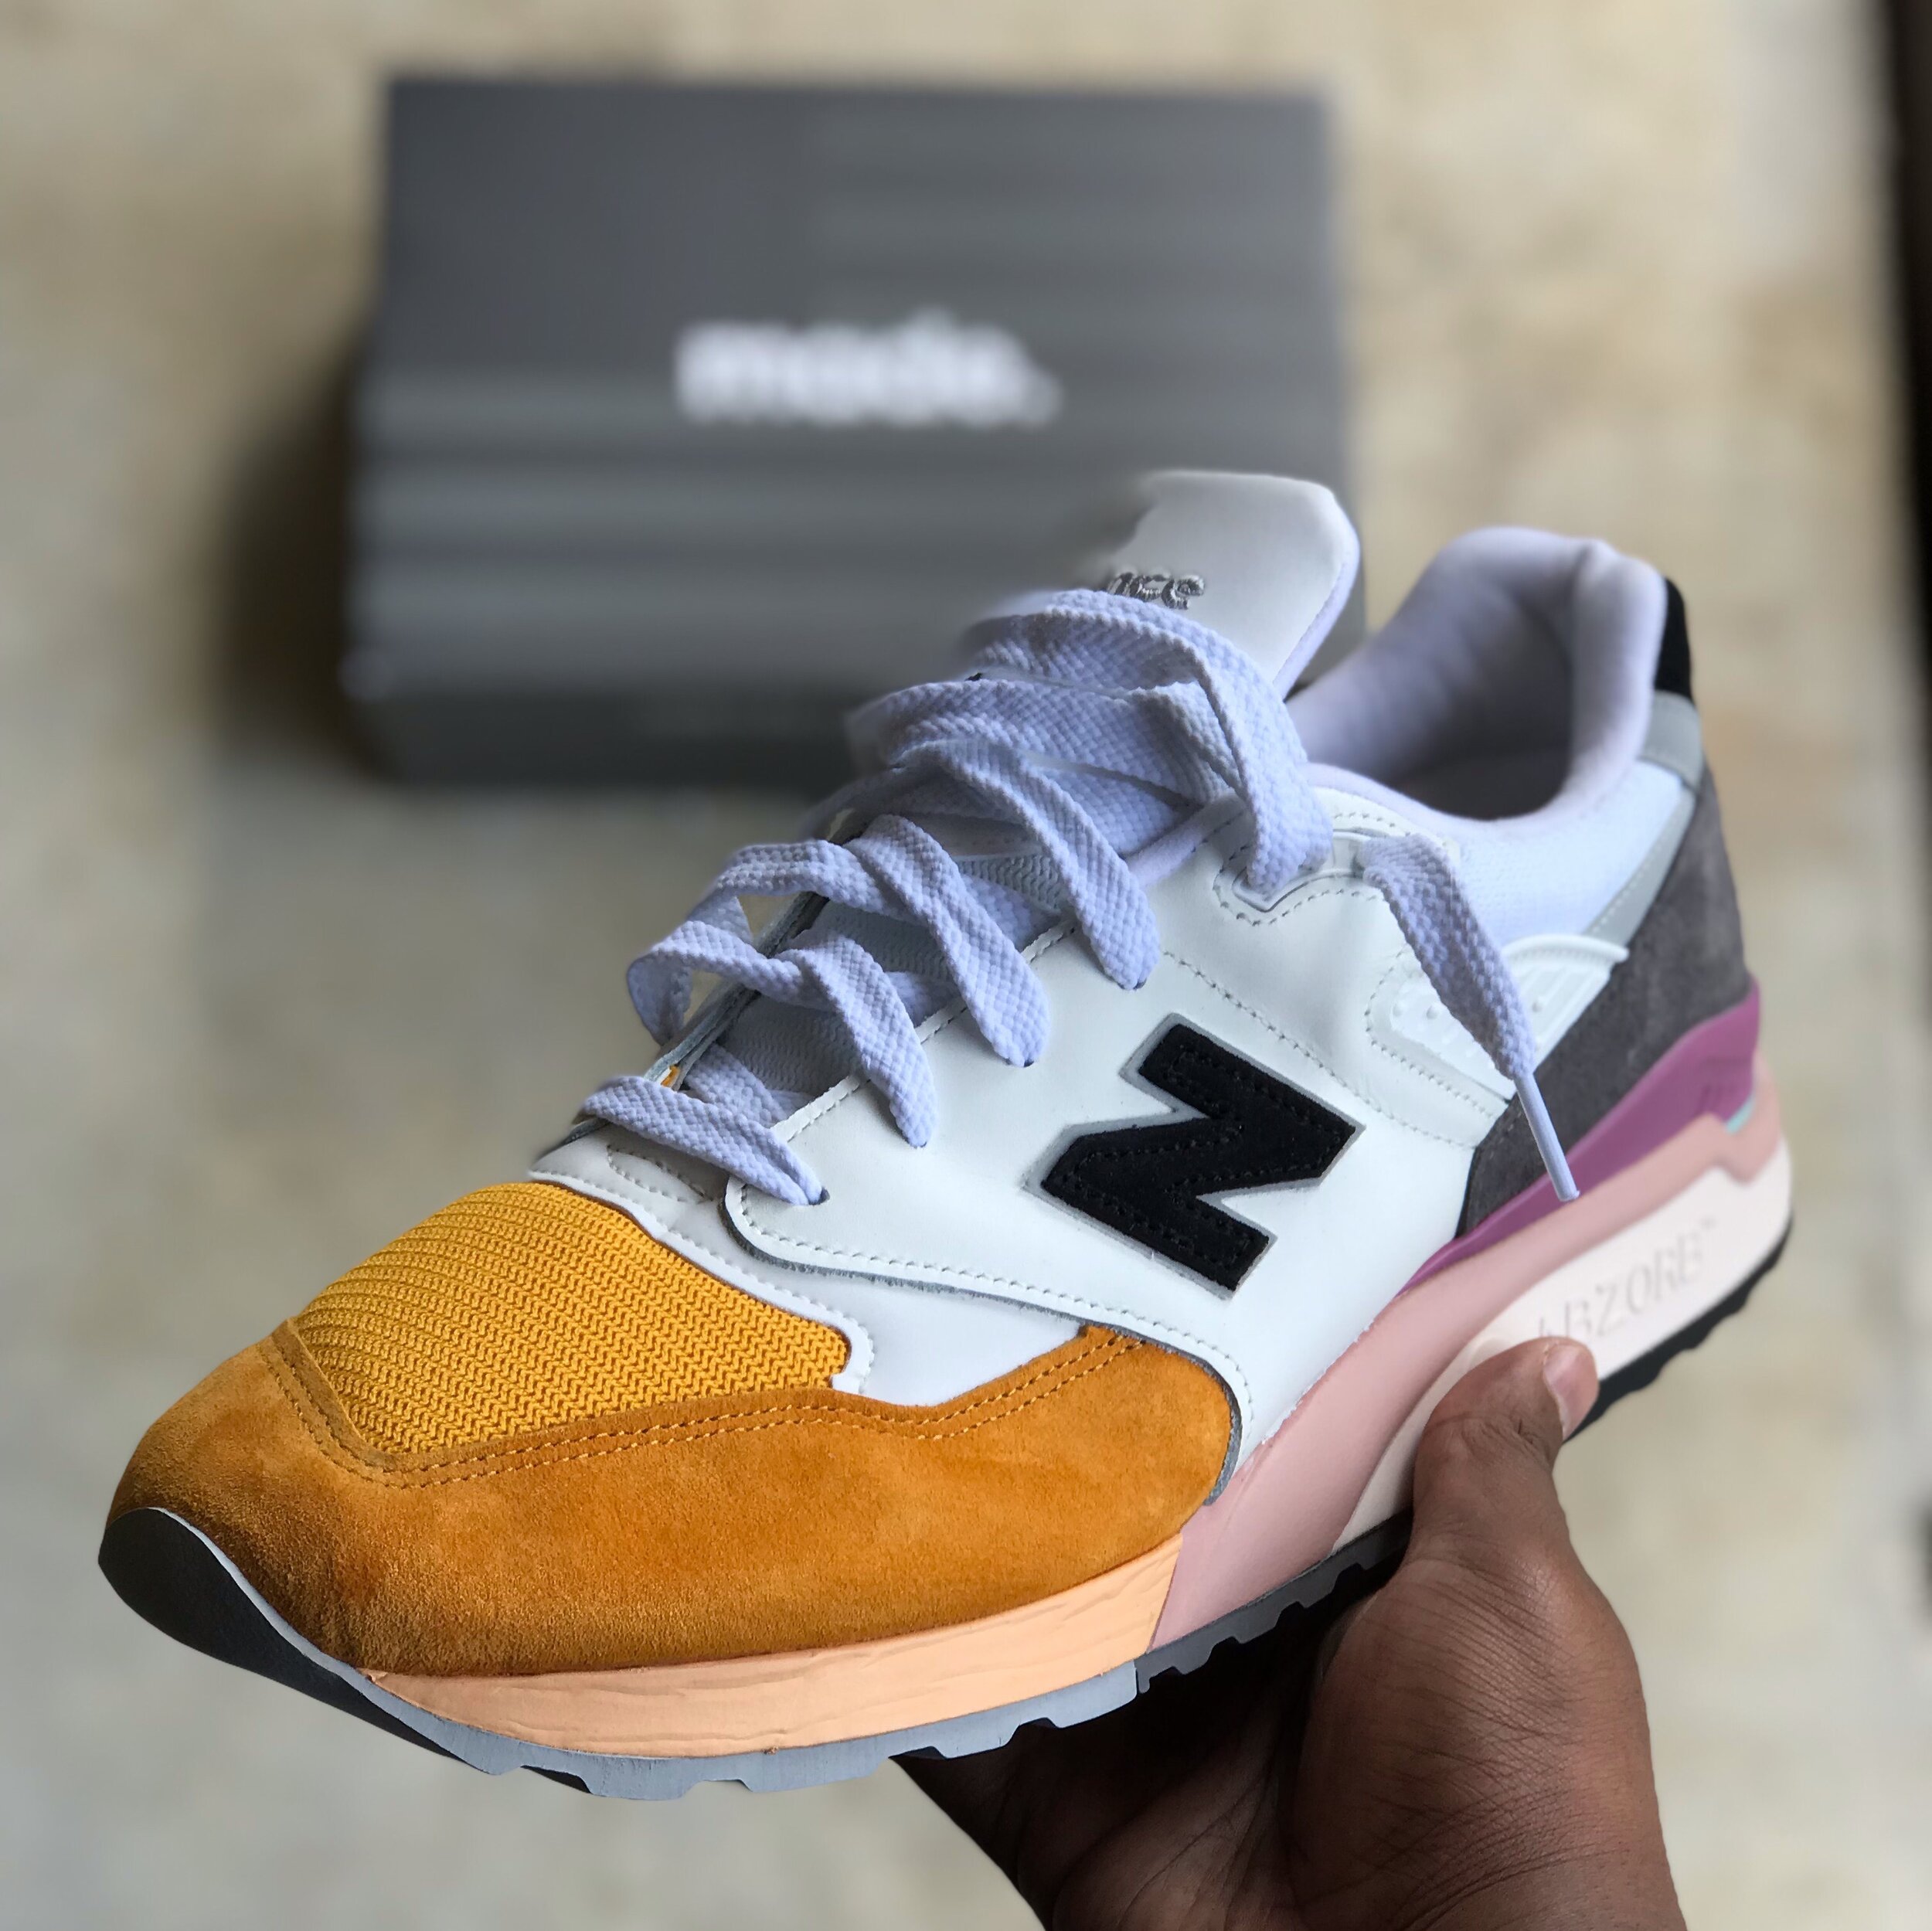 New Balance 998 Fit? [Easy Sizing Guide 